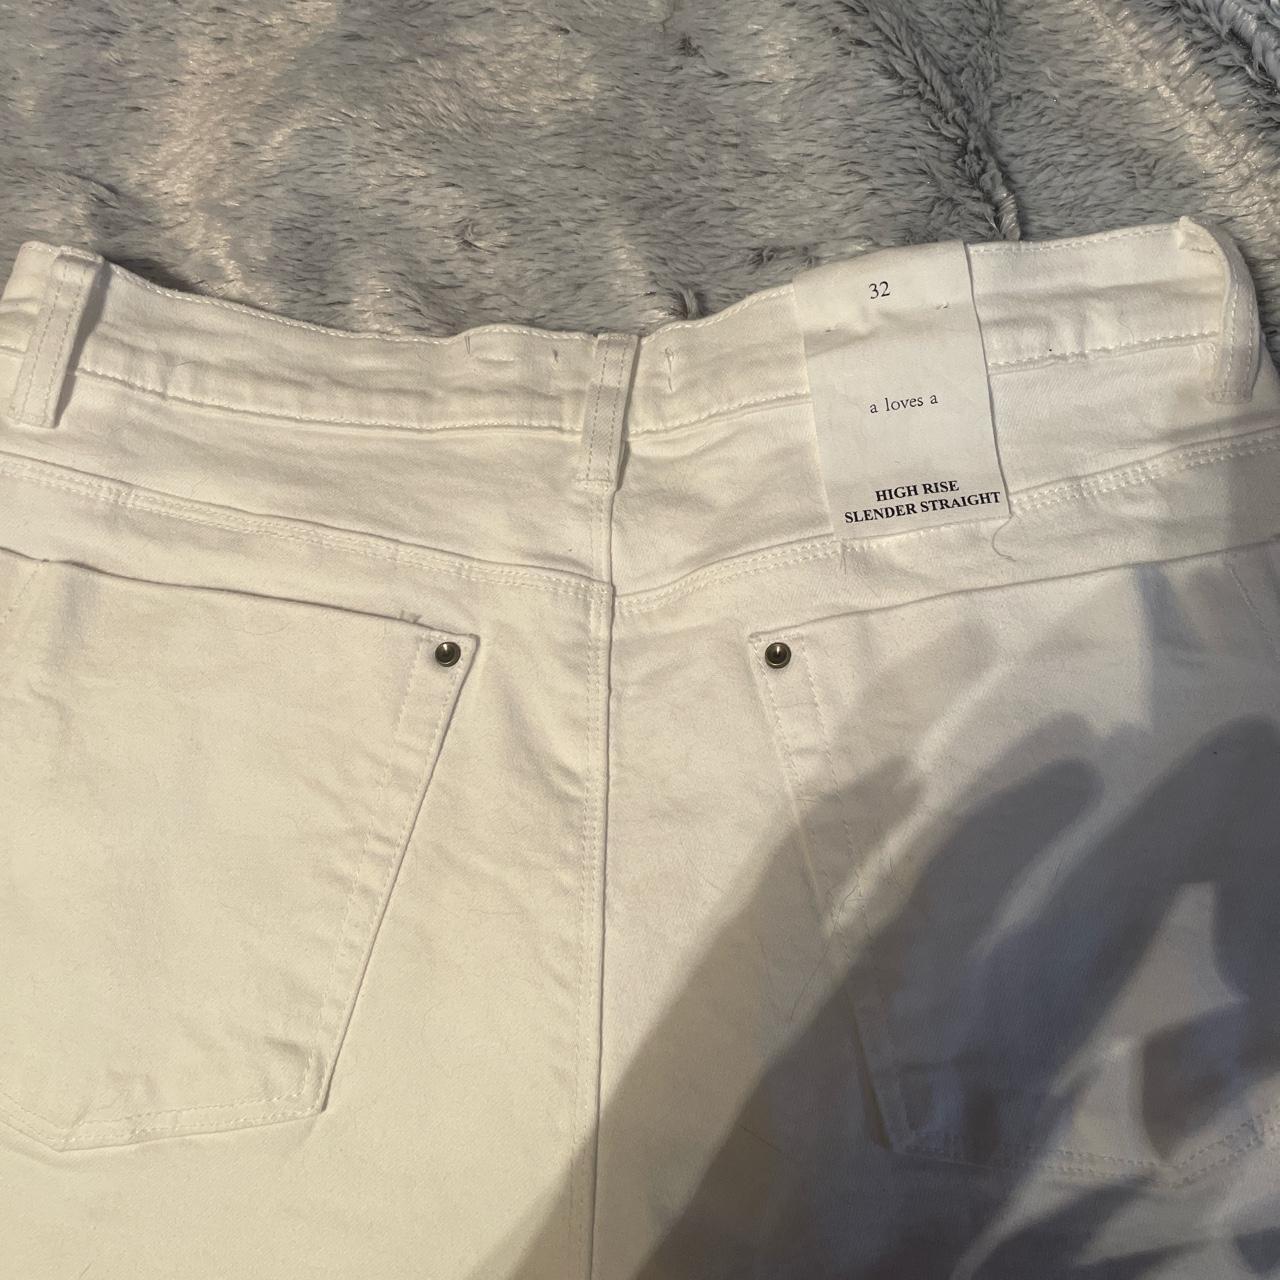 A Loves A Women's White and Grey Jeans (3)